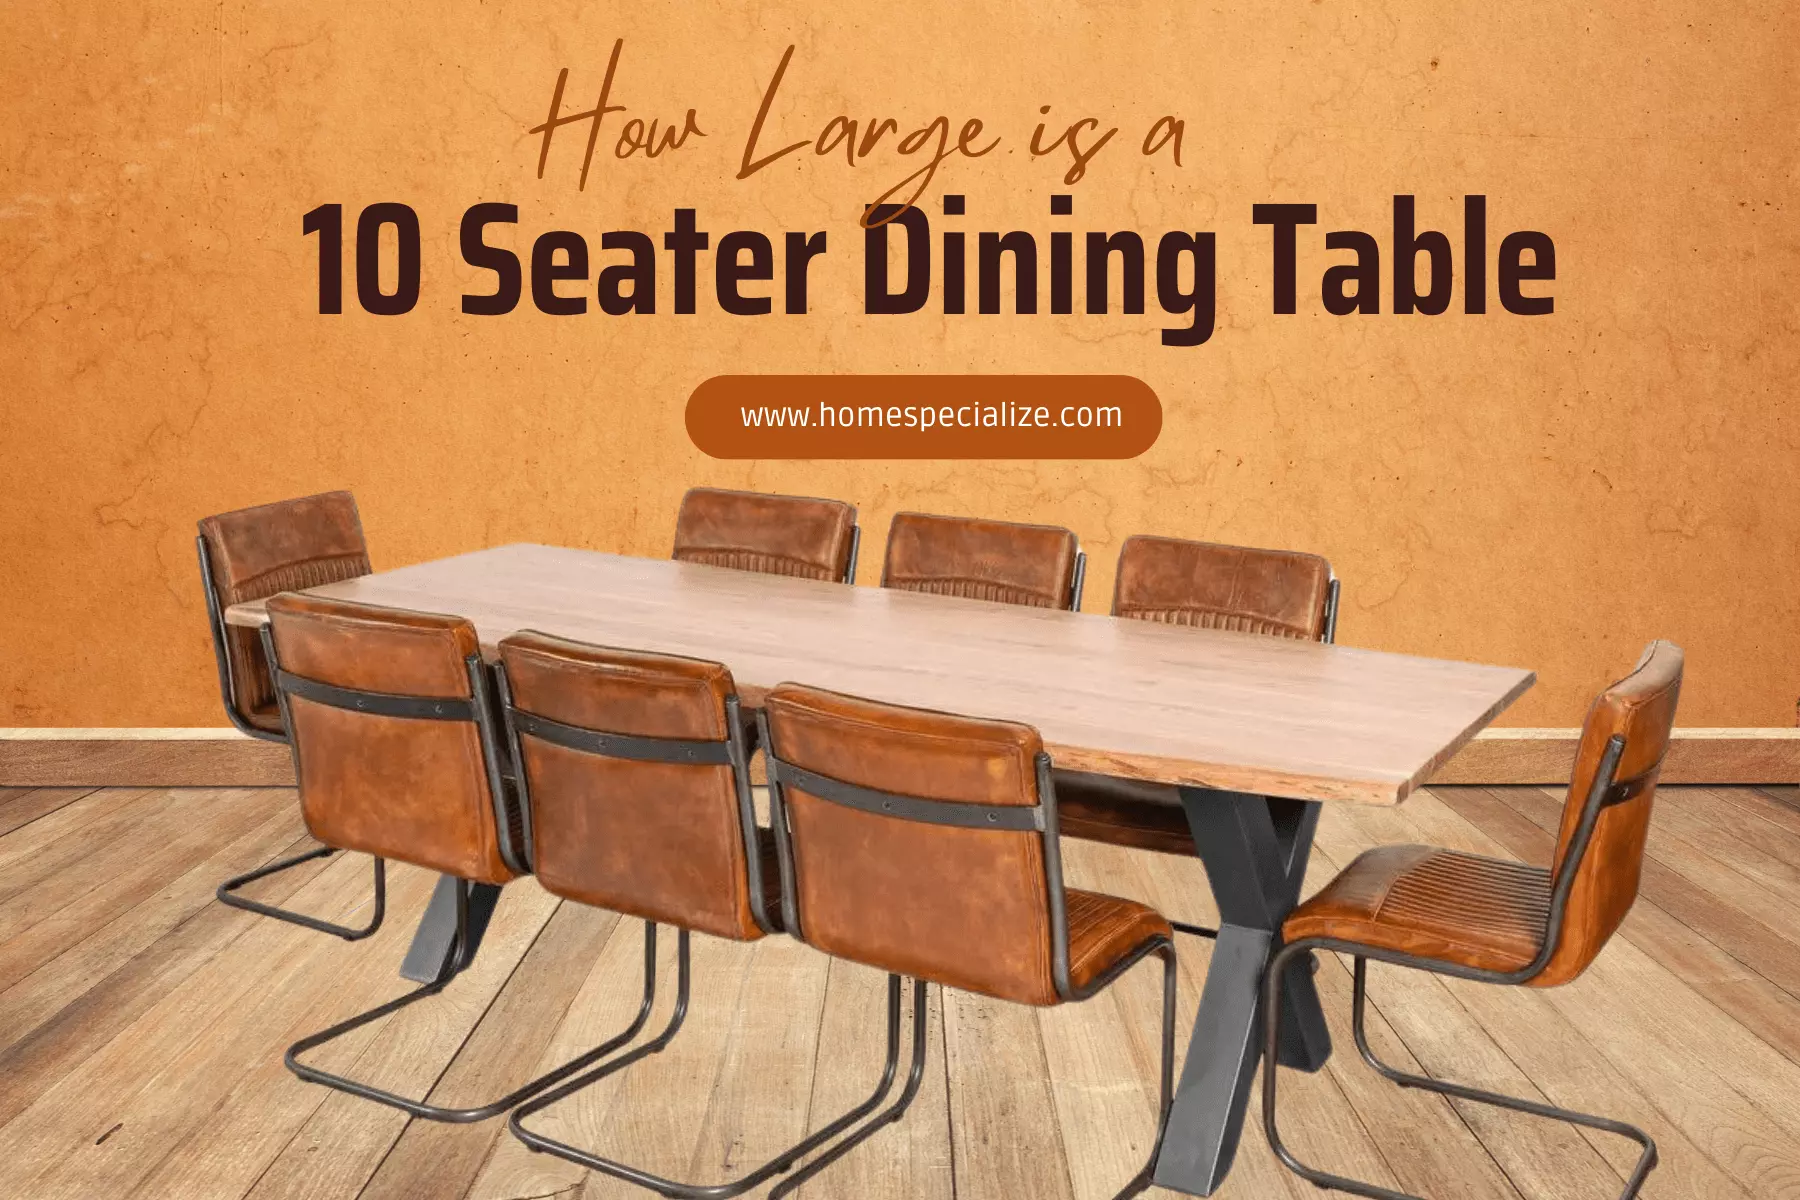 How Large is a 10 Seater Dining Table